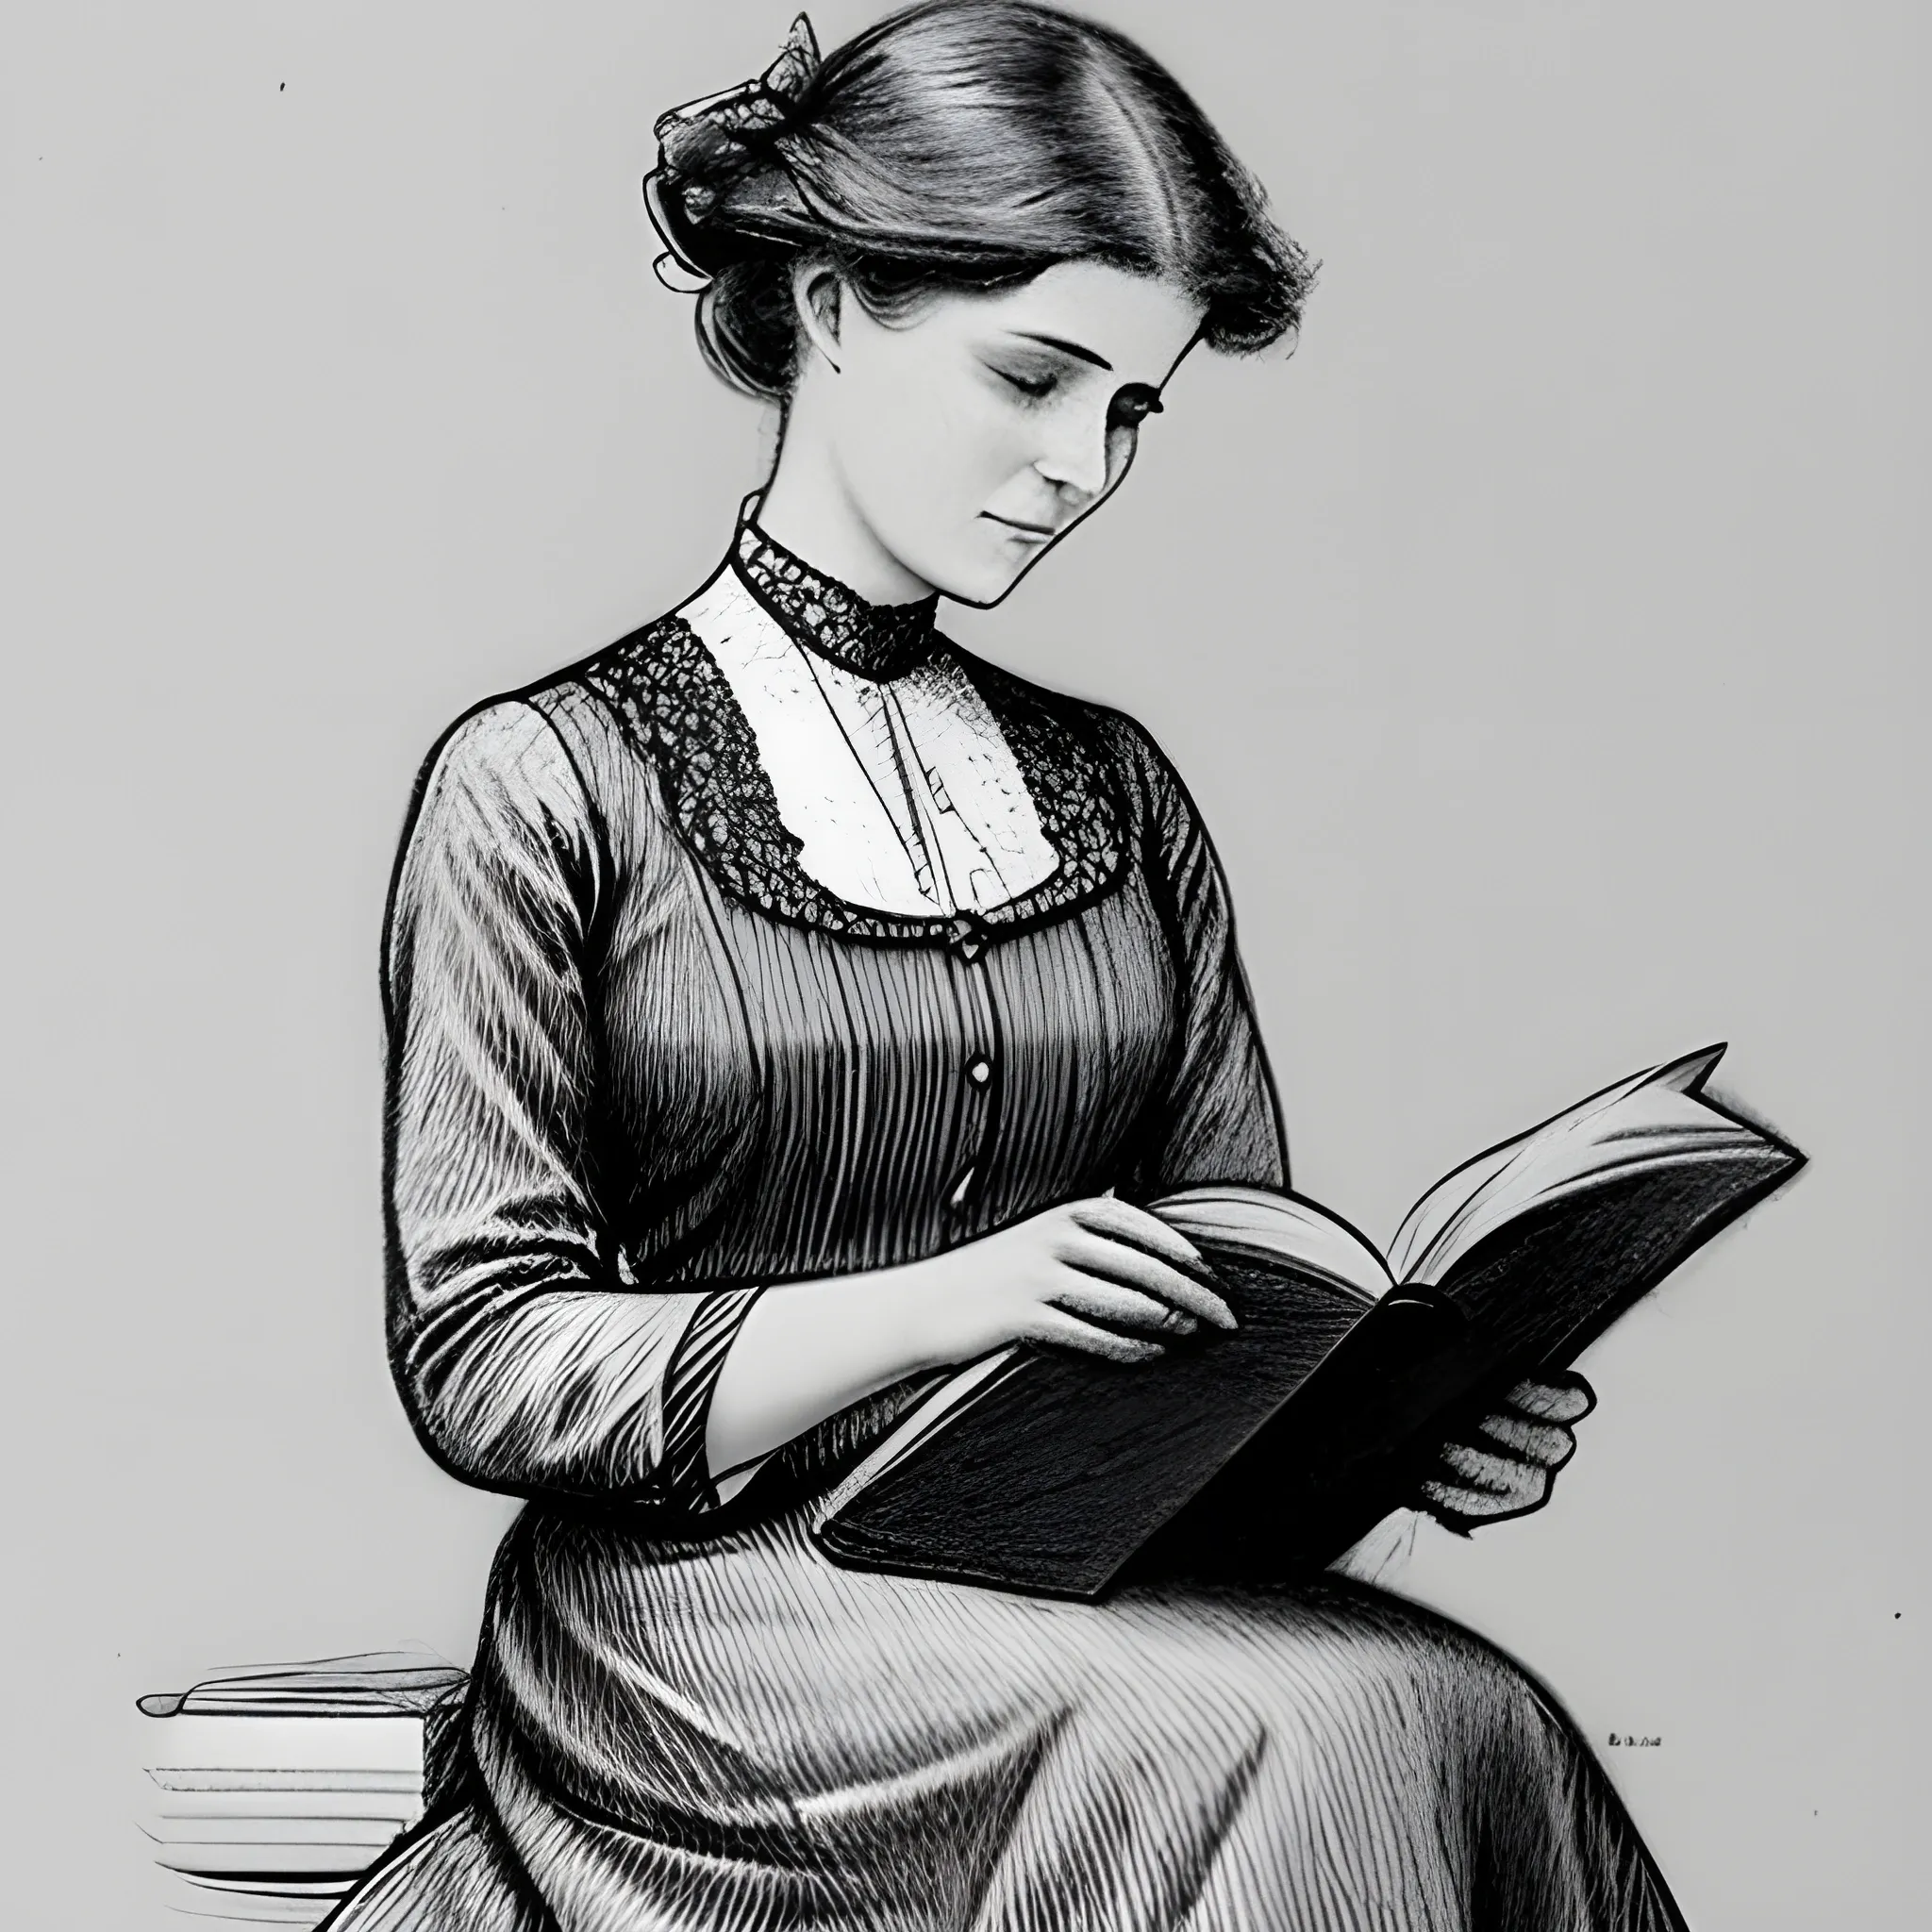 pencil sketch of a woman reading a book, 1900's walking dress